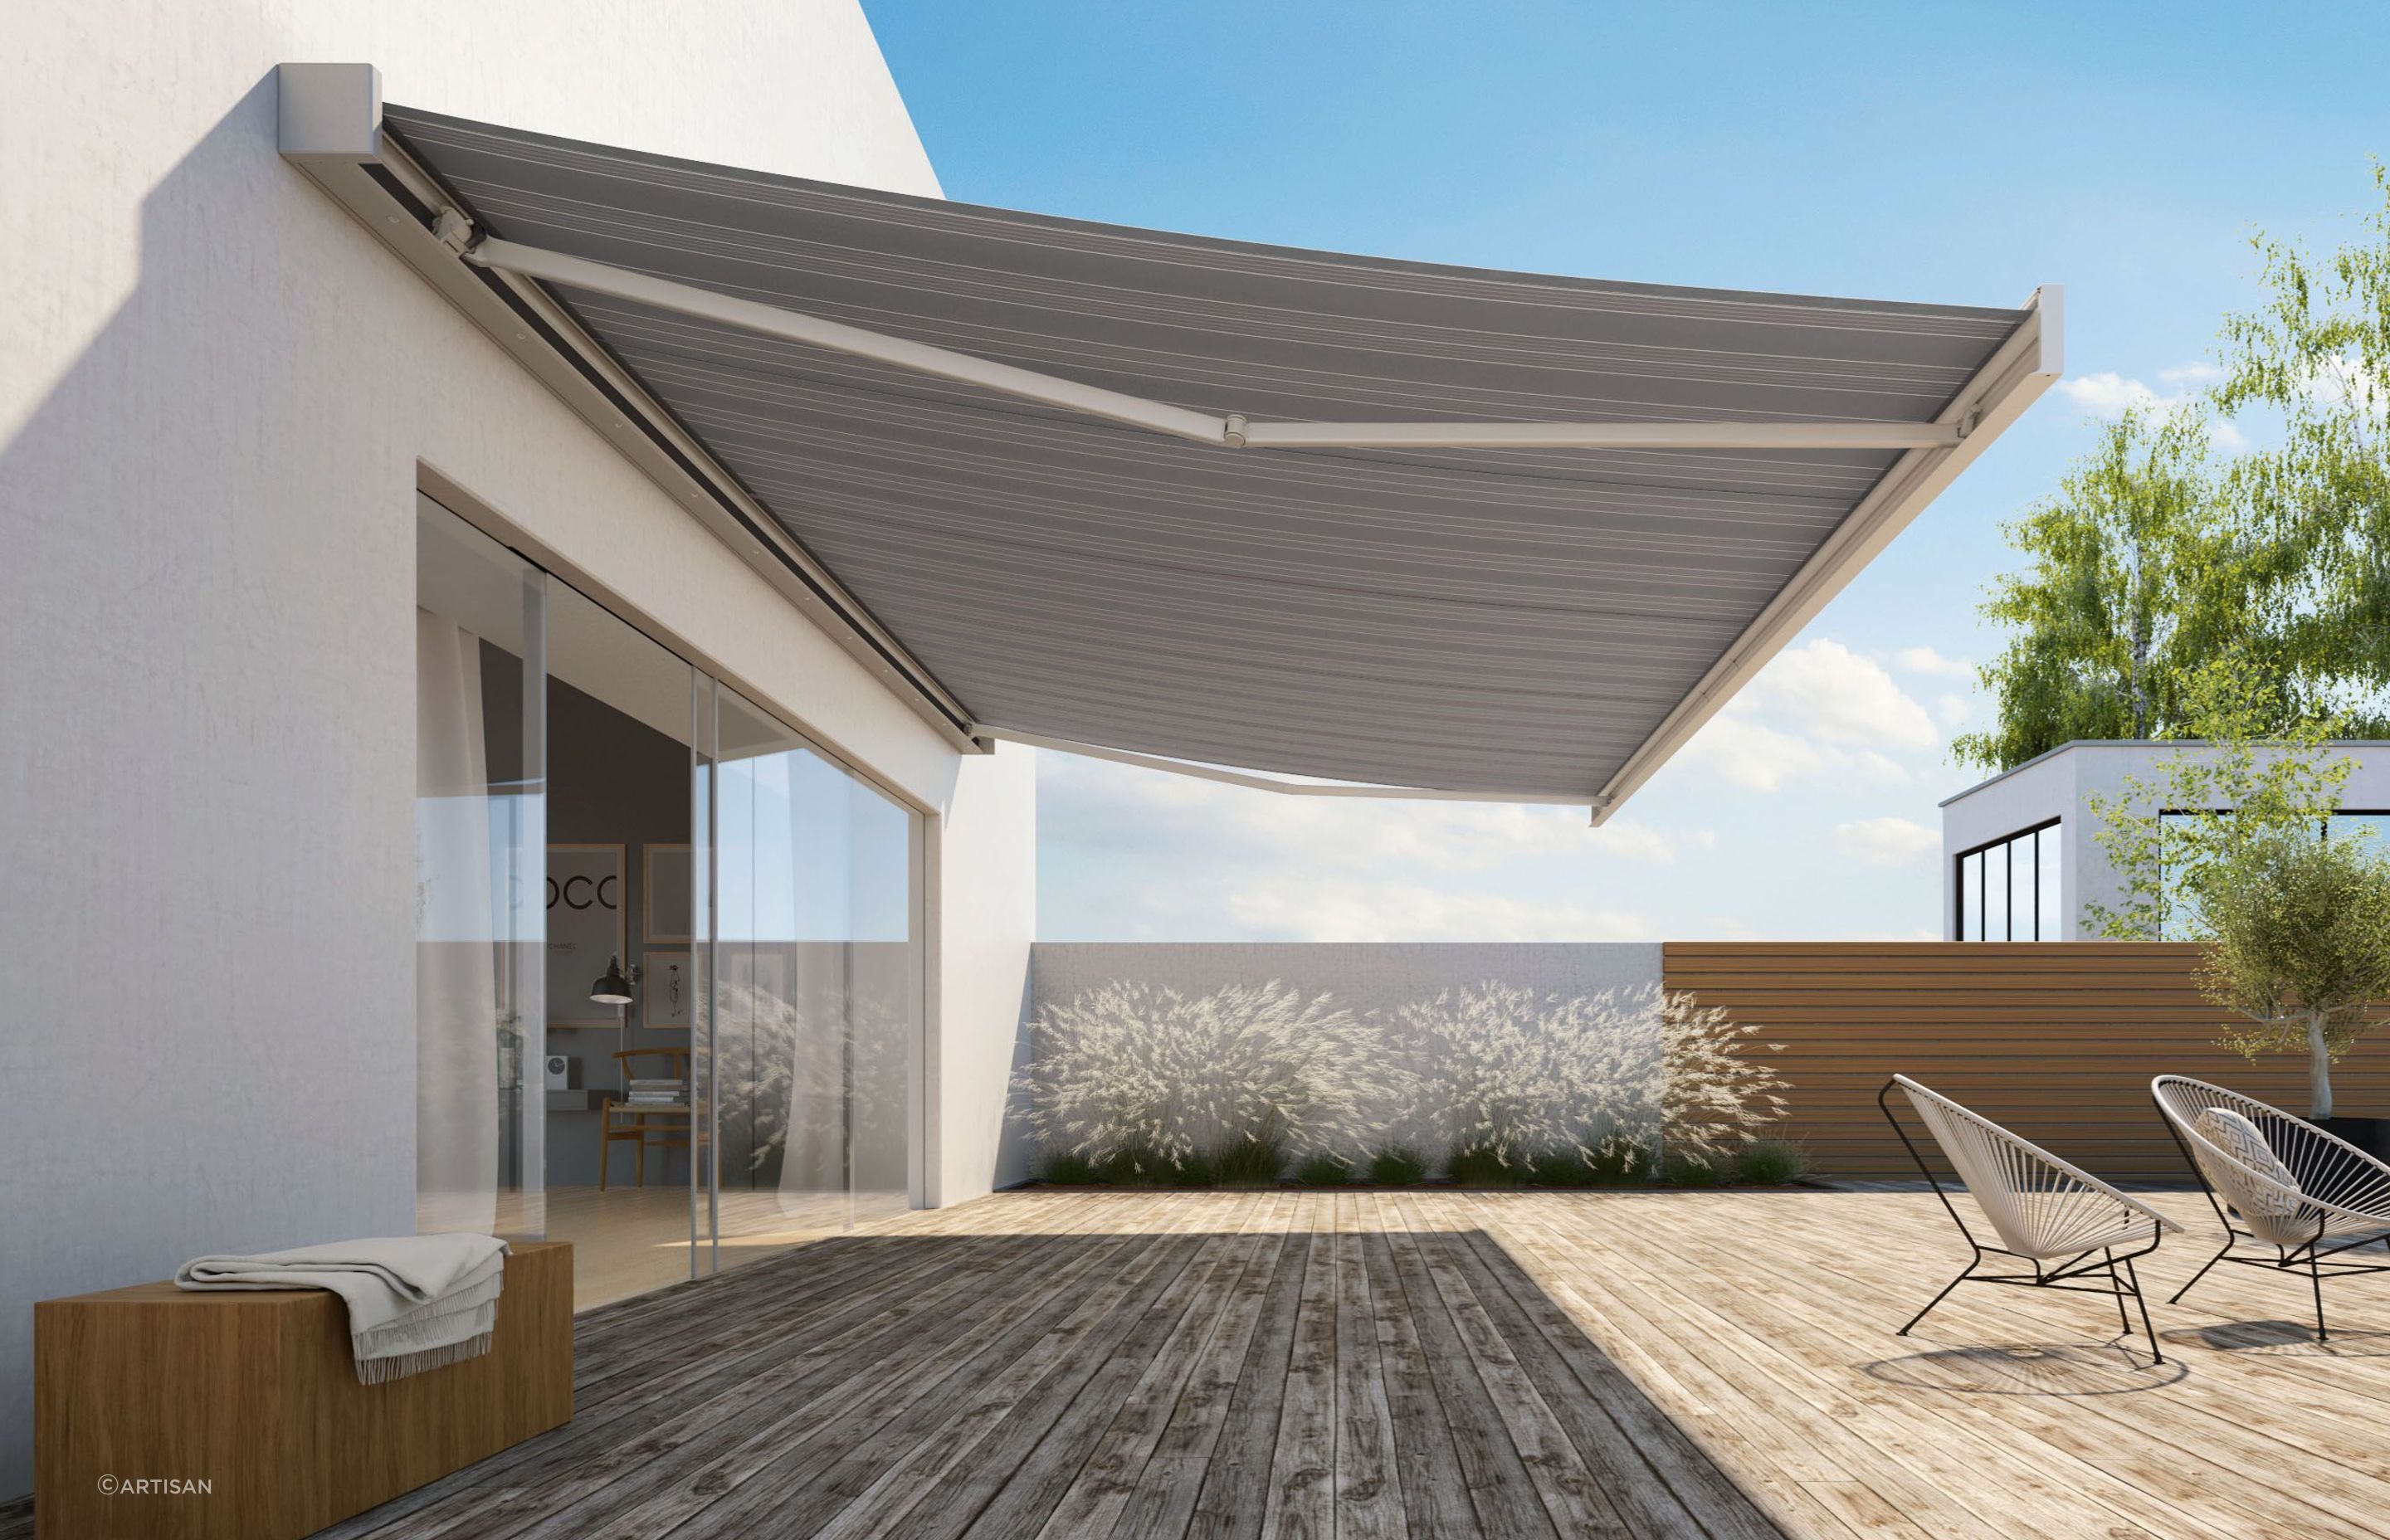 An excellent example of a high-quality retractable awning with the Weinor Kubata featuring a modern cubic design